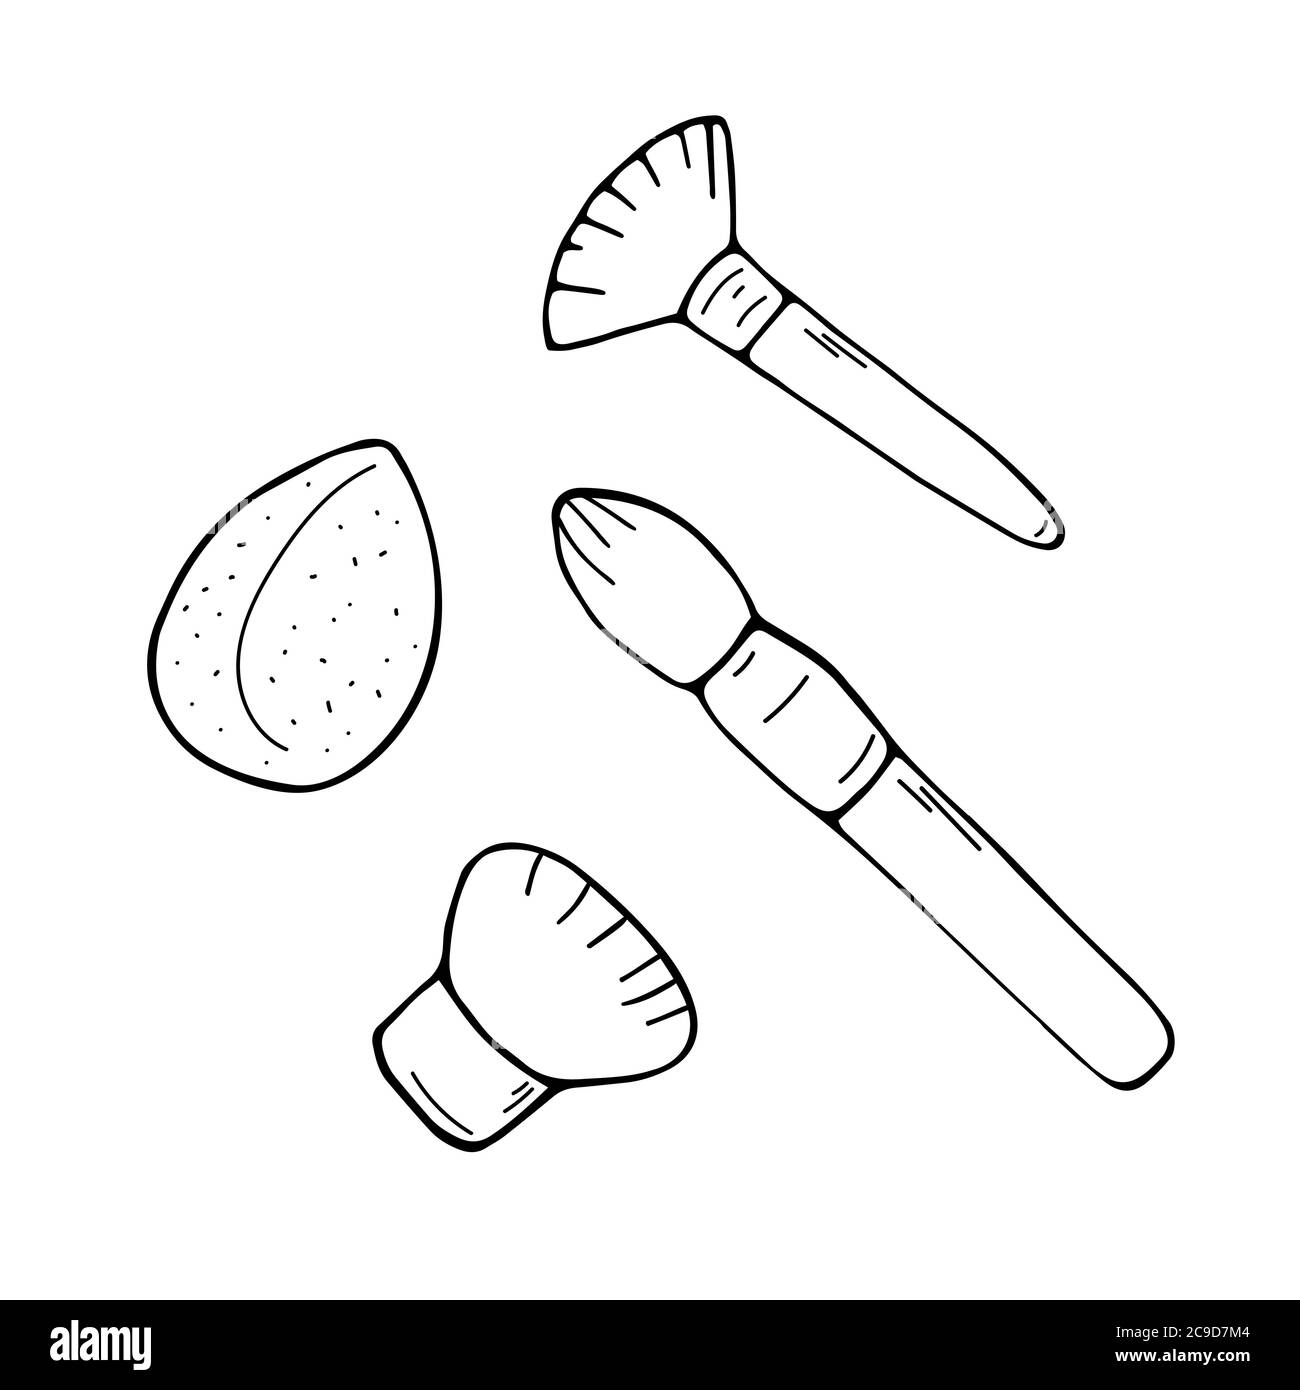 Make up brushes sketch collection. Cosmetic tools set. Fashion and beauty illustration. Vector hand drawn doodle graphic Stock Vector